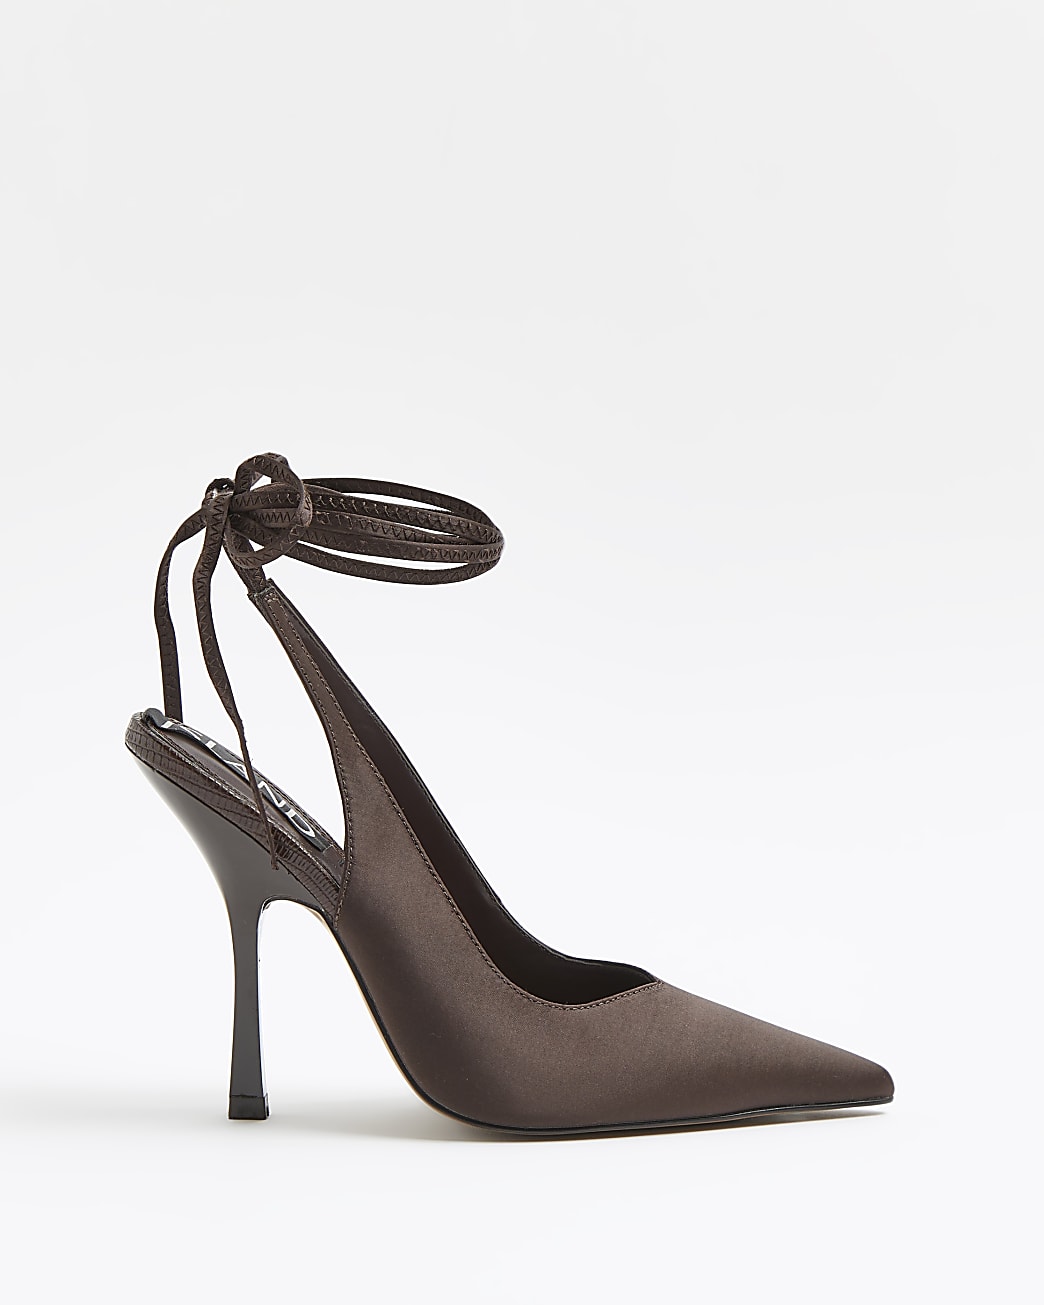 Brown ankle tie court shoes